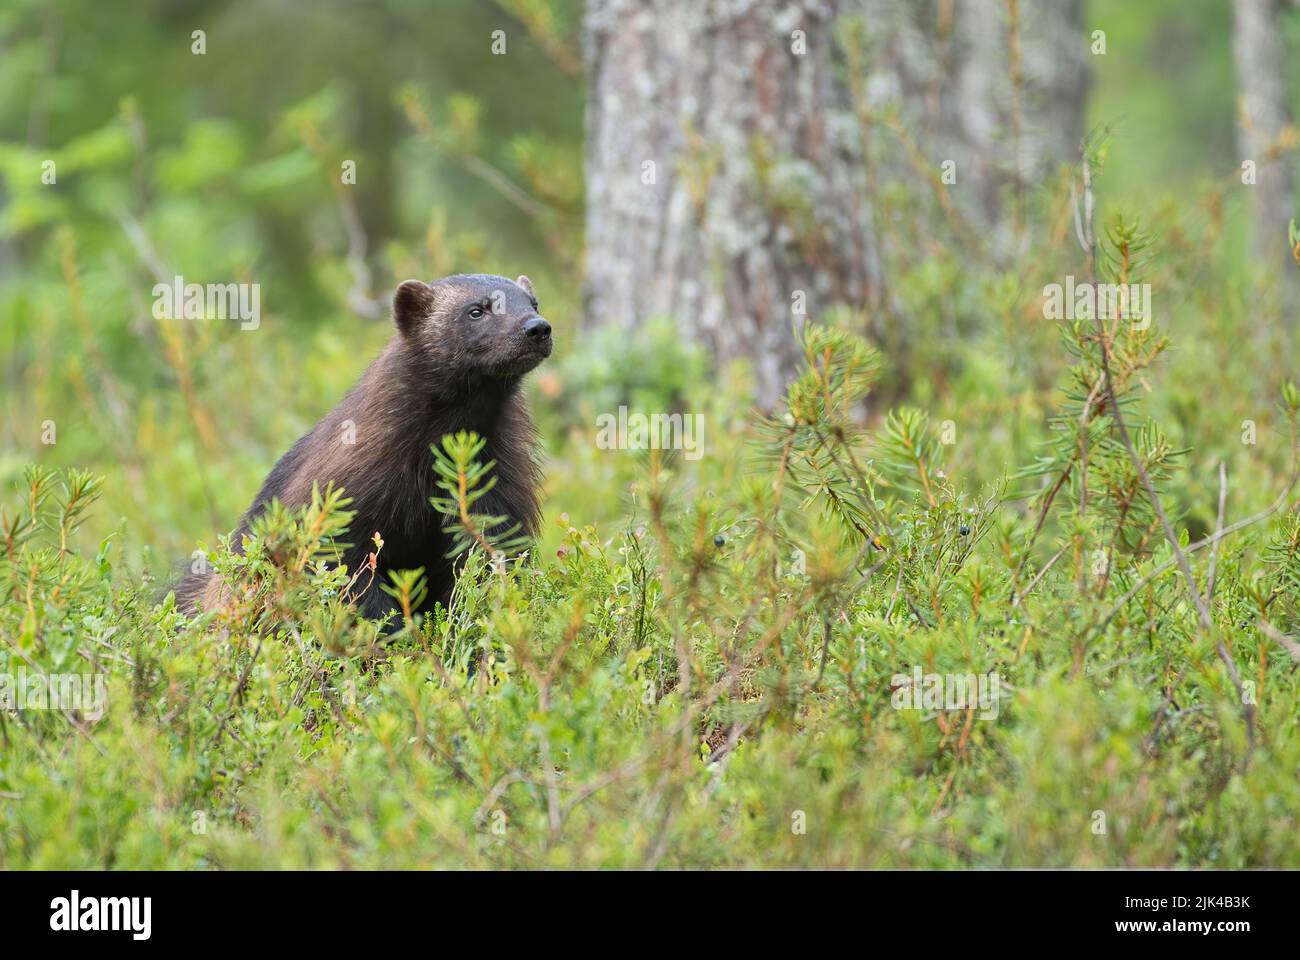 Wolverine (Gulo gulo) photographed in the taiga forest of Finland Stock Photo